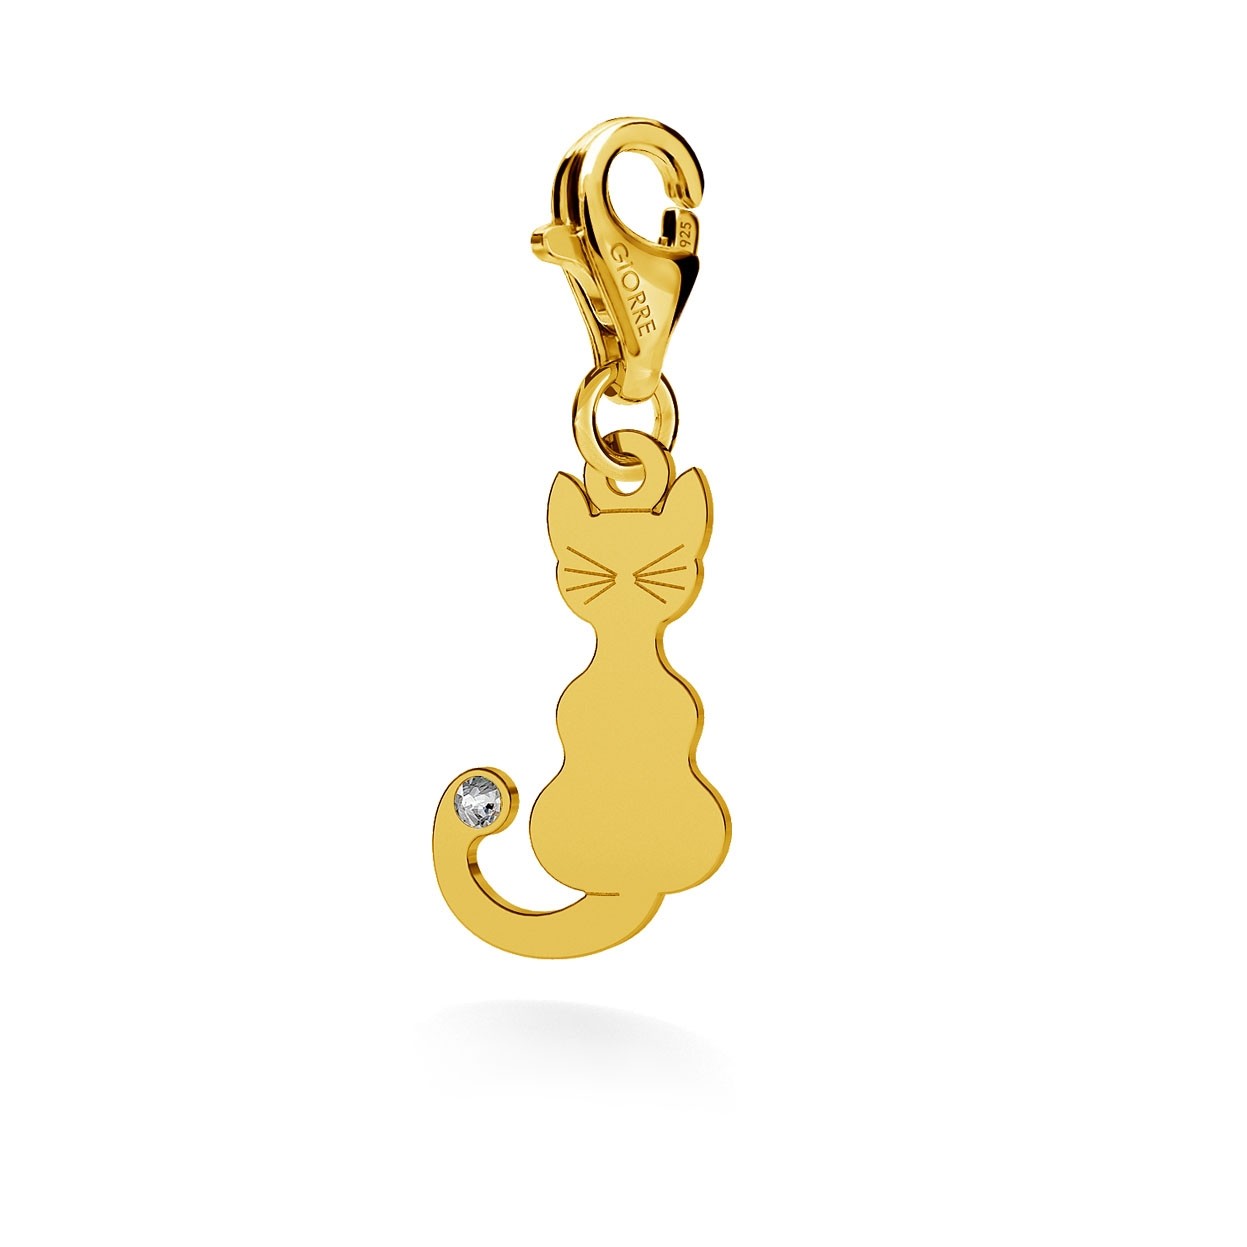 CHARM 107, PERSONALIZED CAT, SWAROVSKI 2038 SS 6, STERLING SILVER (925) RHODIUM OR GOLD PLATED